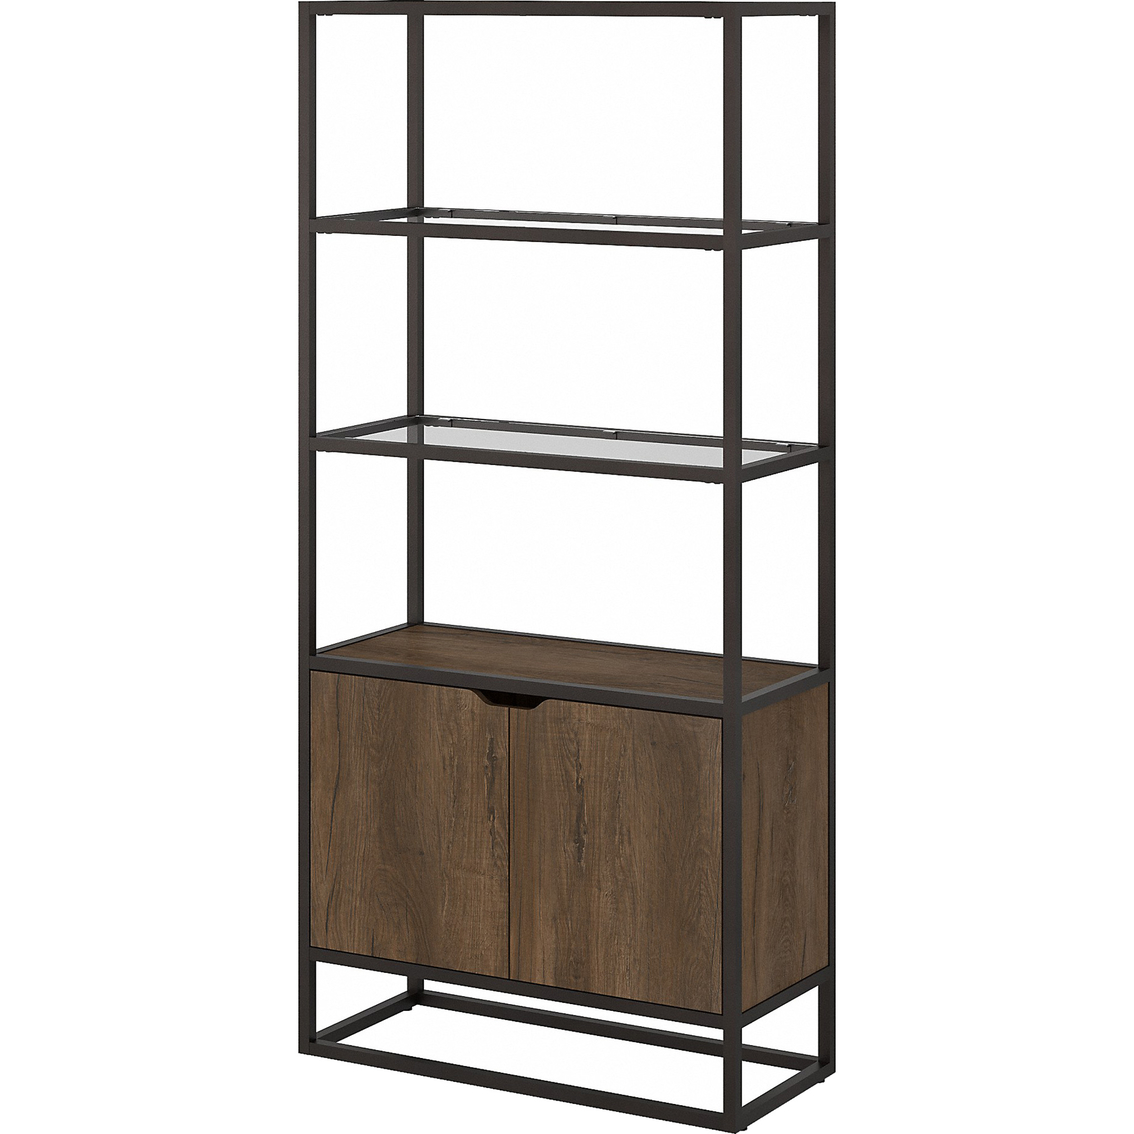 Bush Furniture Anthropology 5 Shelf Bookcase With Doors | Bookcases ...